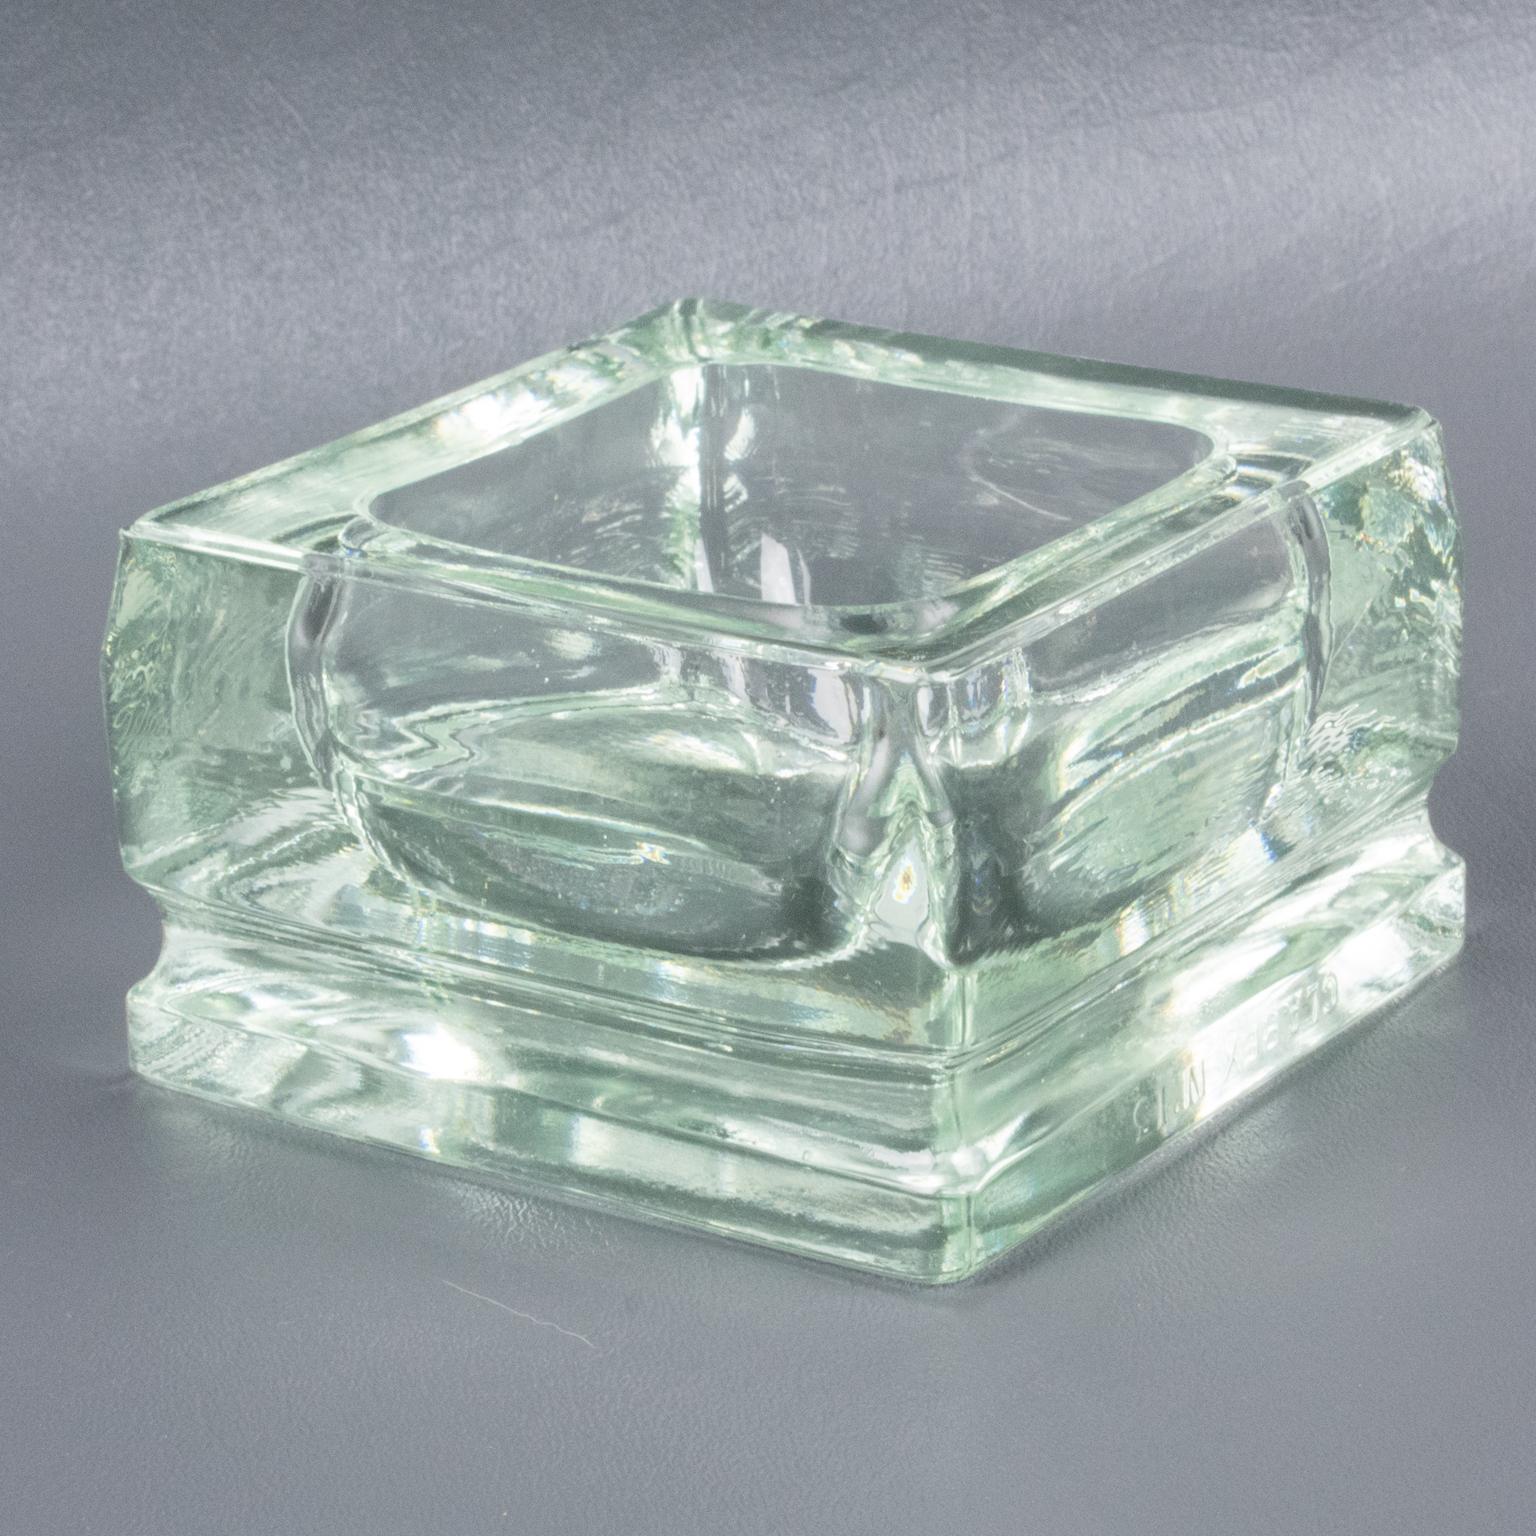 French Designed by Le Corbusier for Lumax Glass Desk Tidy Ashtray Catchall